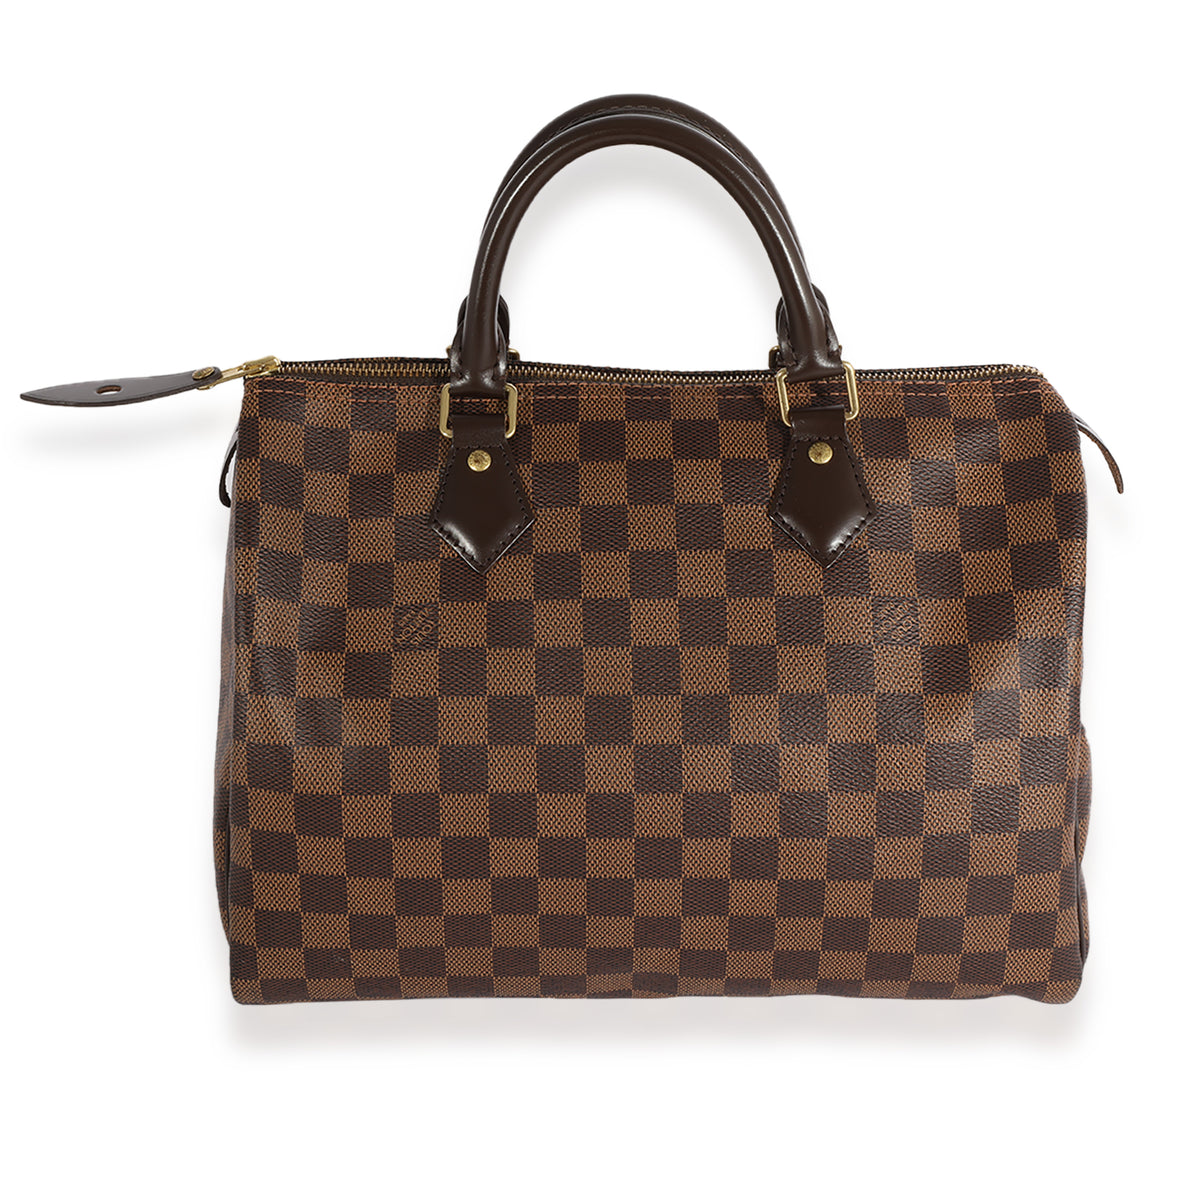 Get huge discounts on Louis Damier Ebene Speedy 30 Vuitton . The most effective products are available at the most affordable prices, and great